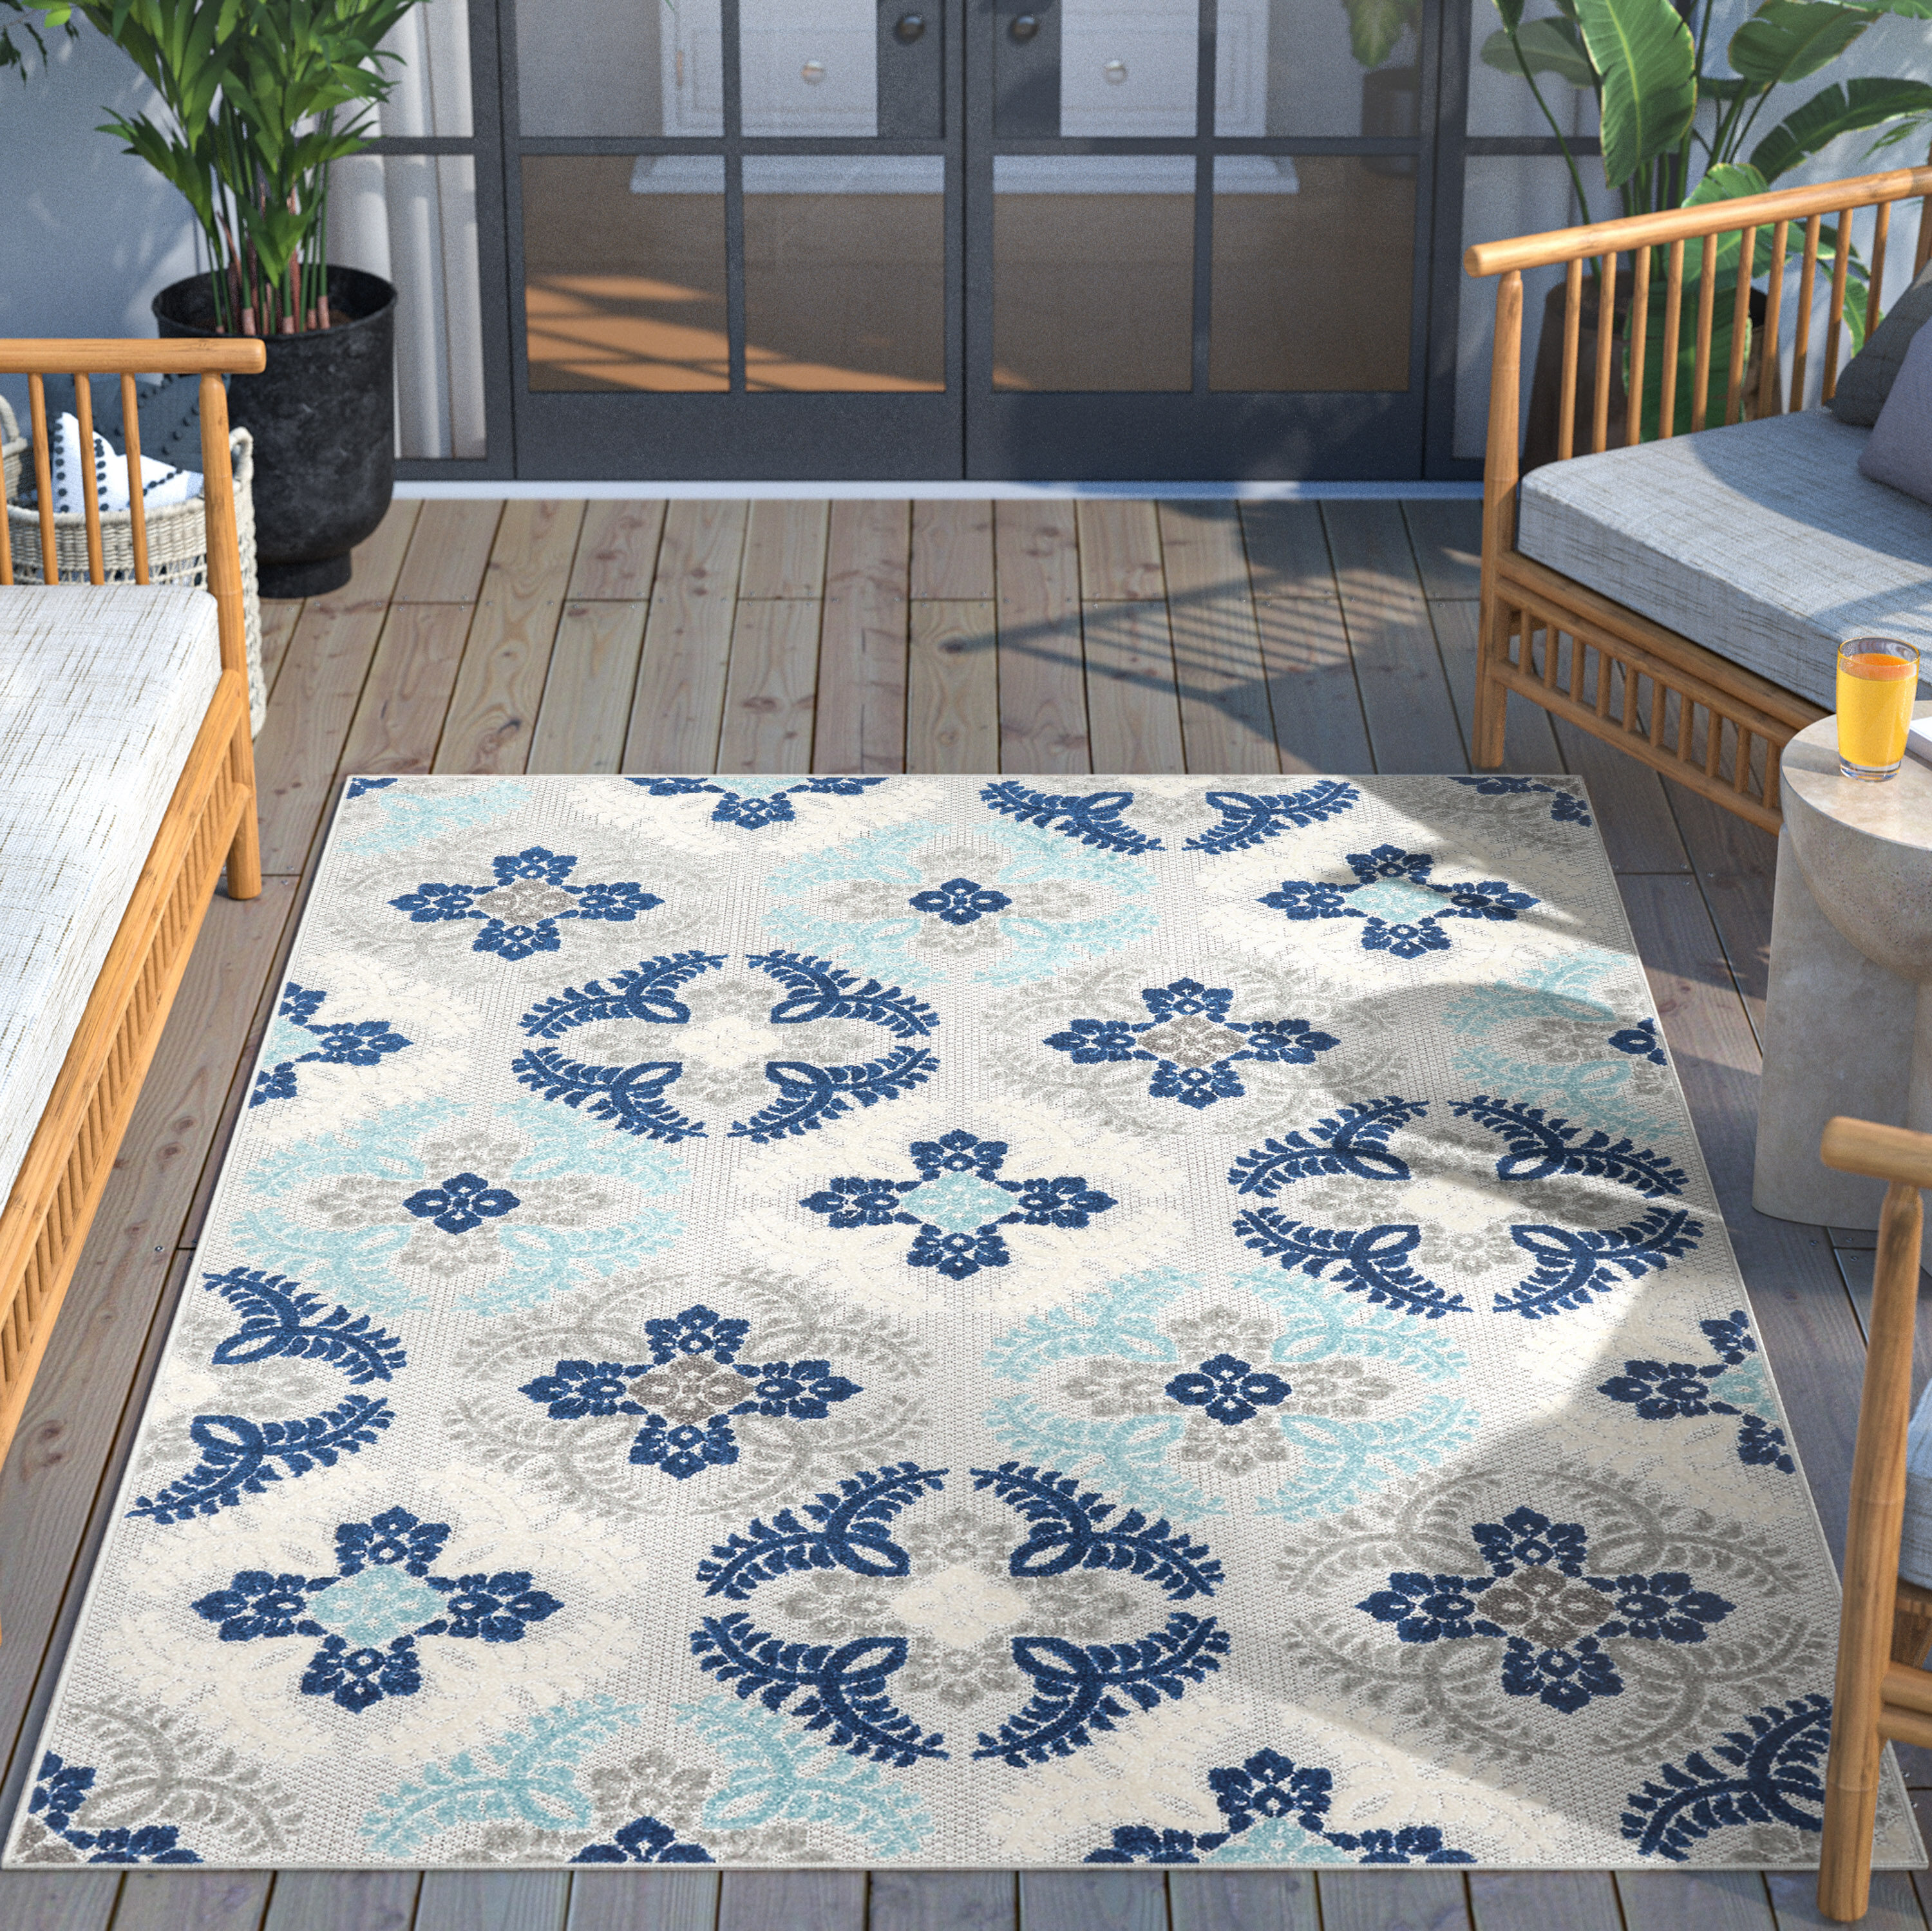 Well Woven 5 x 7 Frieze Blue Indoor/Outdoor Geometric Mid-century Modern  Area Rug in the Rugs department at